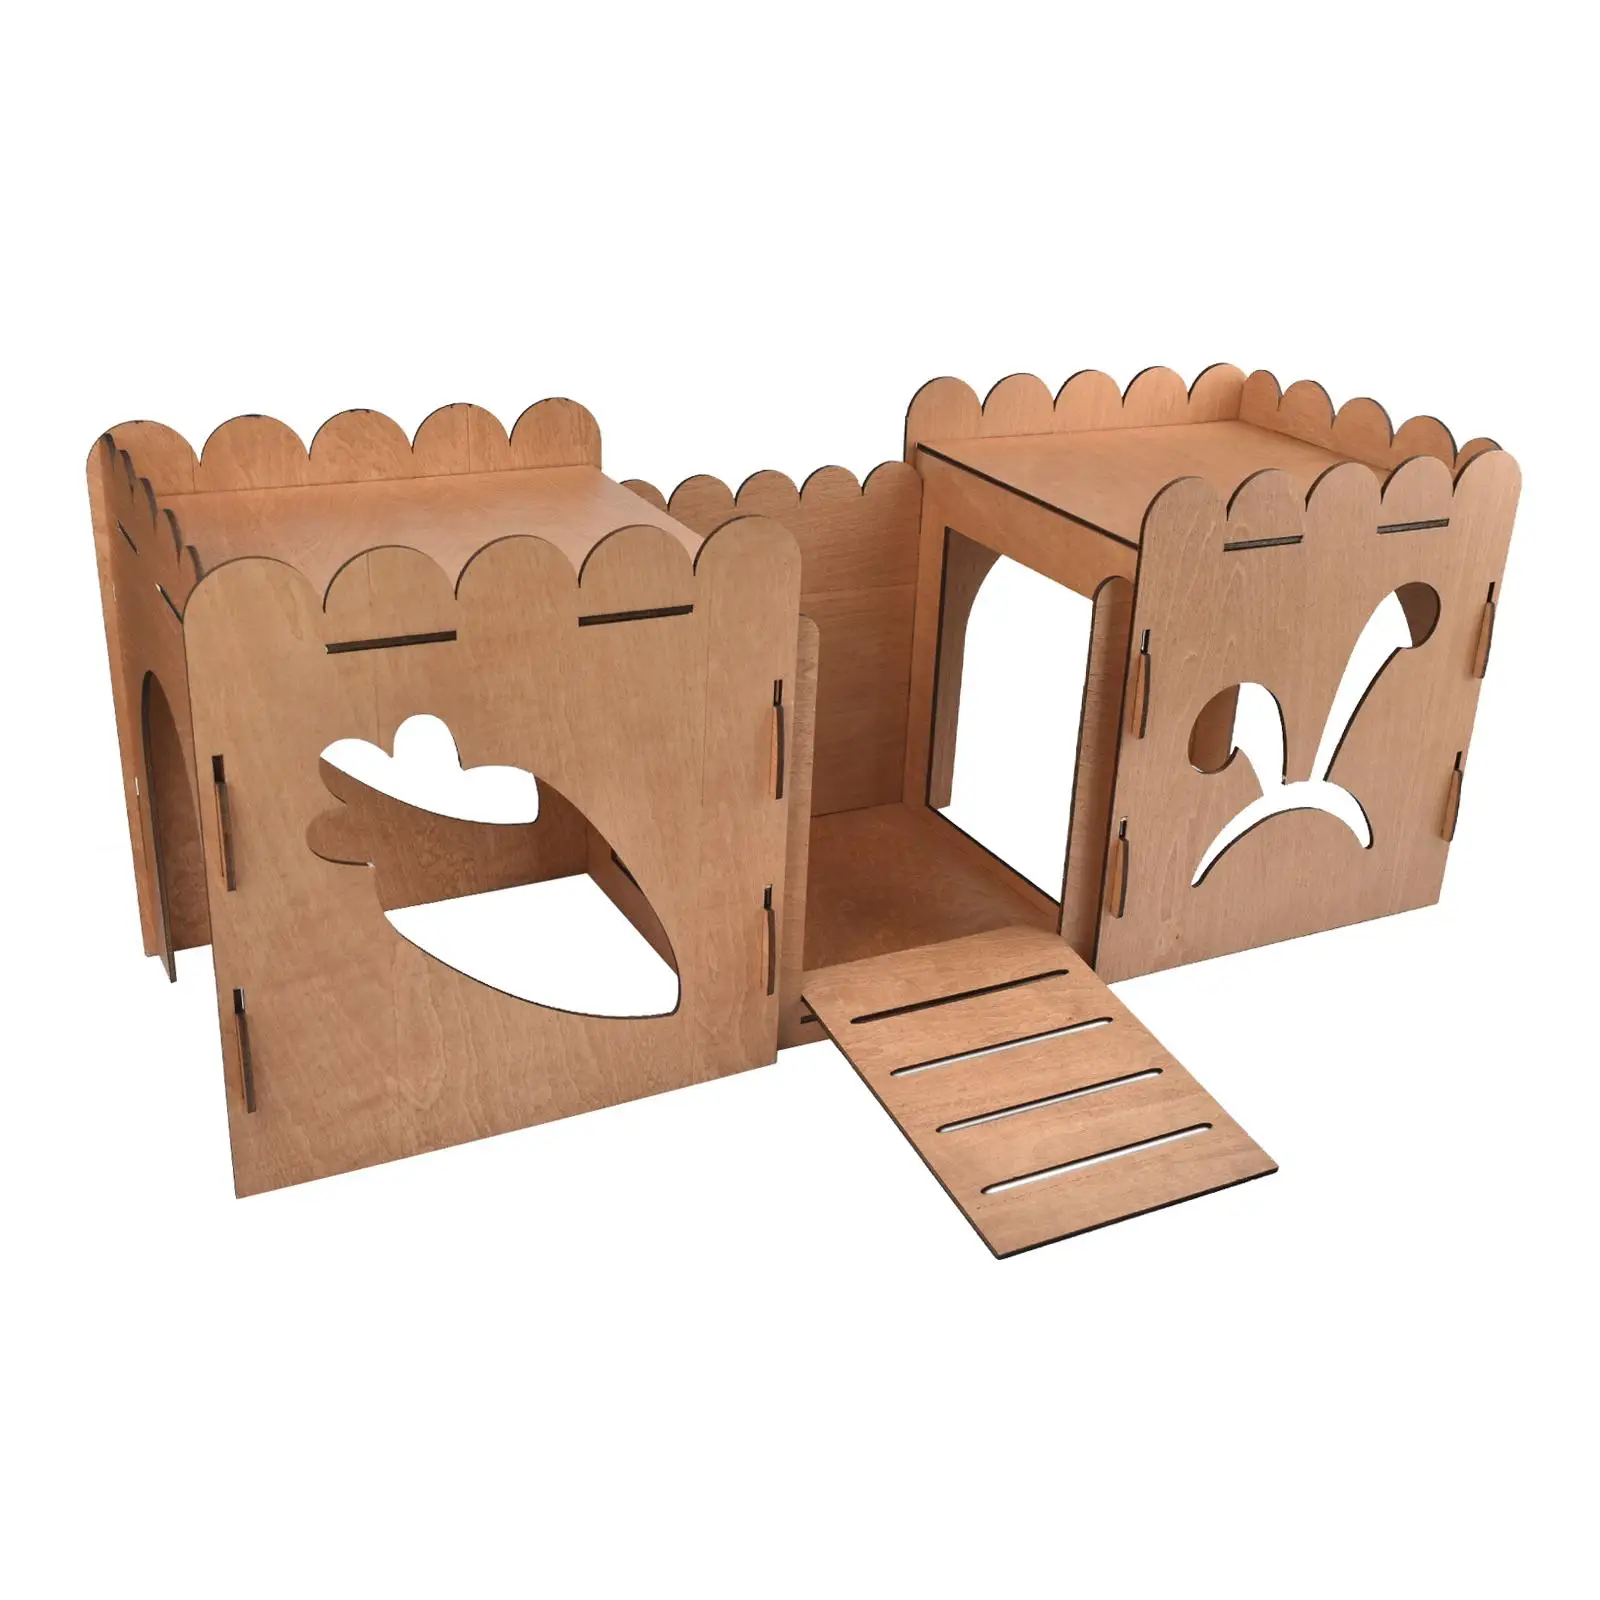 Hamster House Small Animal House Bed with Stairs Wooden Rabbit Castle Hideout House for Guinea Pig Squirrel Rat Lemmings Resting